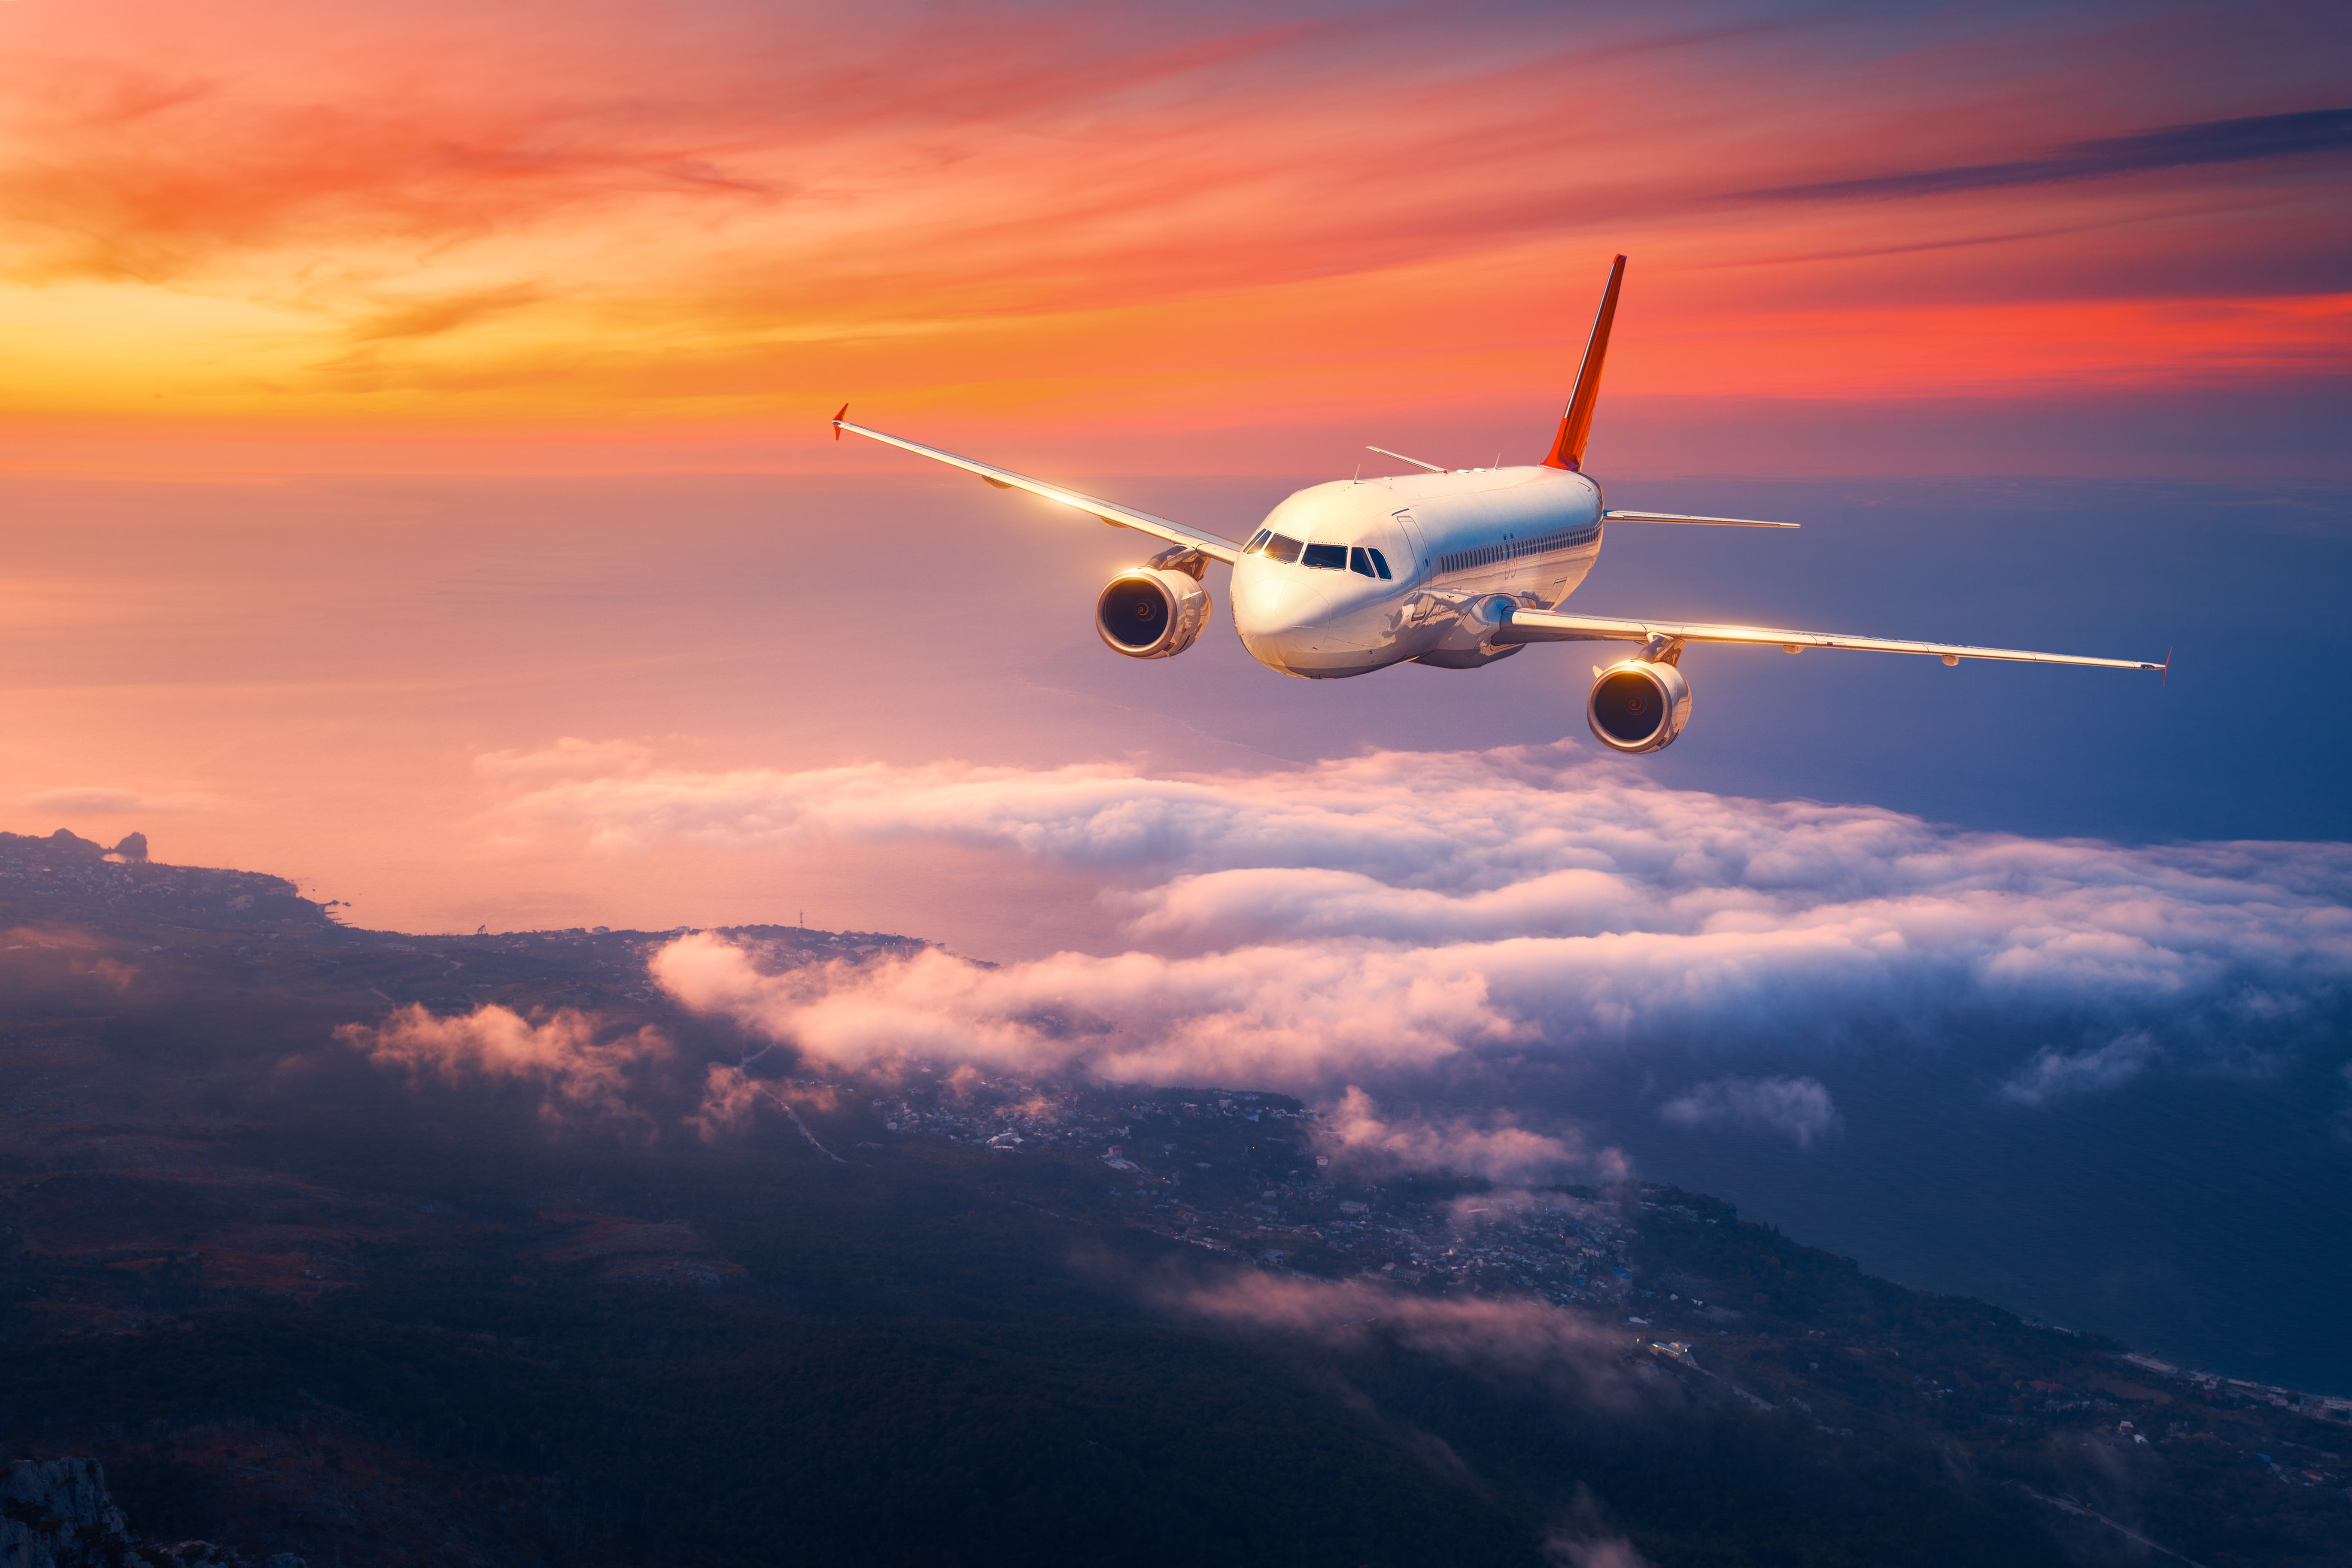 Landscape with big white airplane is flying in the sky over the clouds and sea at colorful sunset